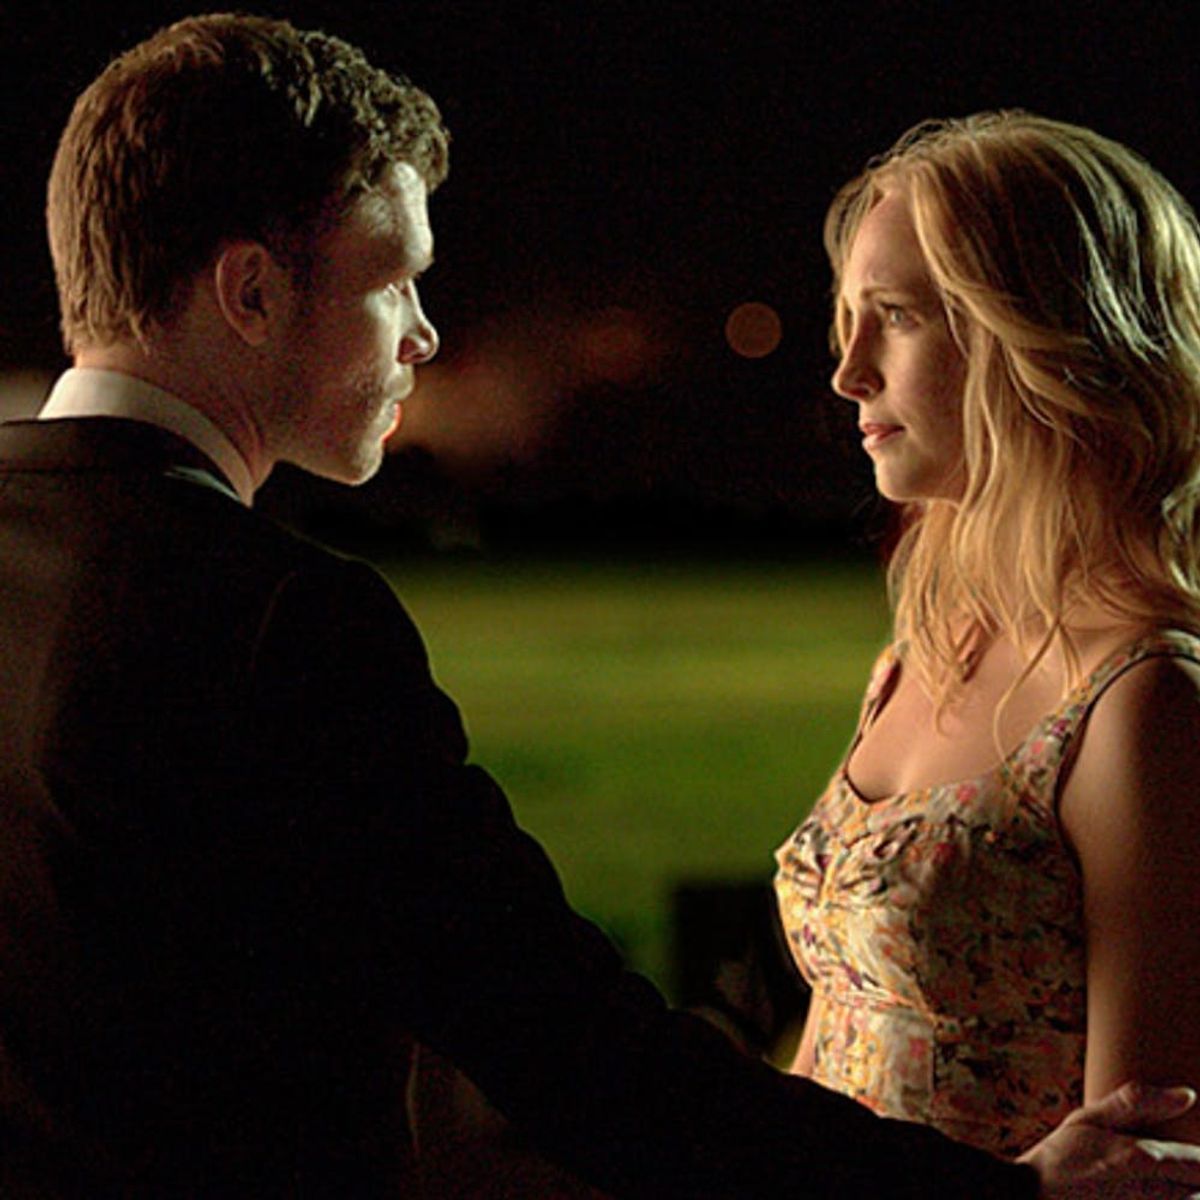 The Vampire Diaries Series Finale Sparks Speculation Over the Future of “Klaroline”